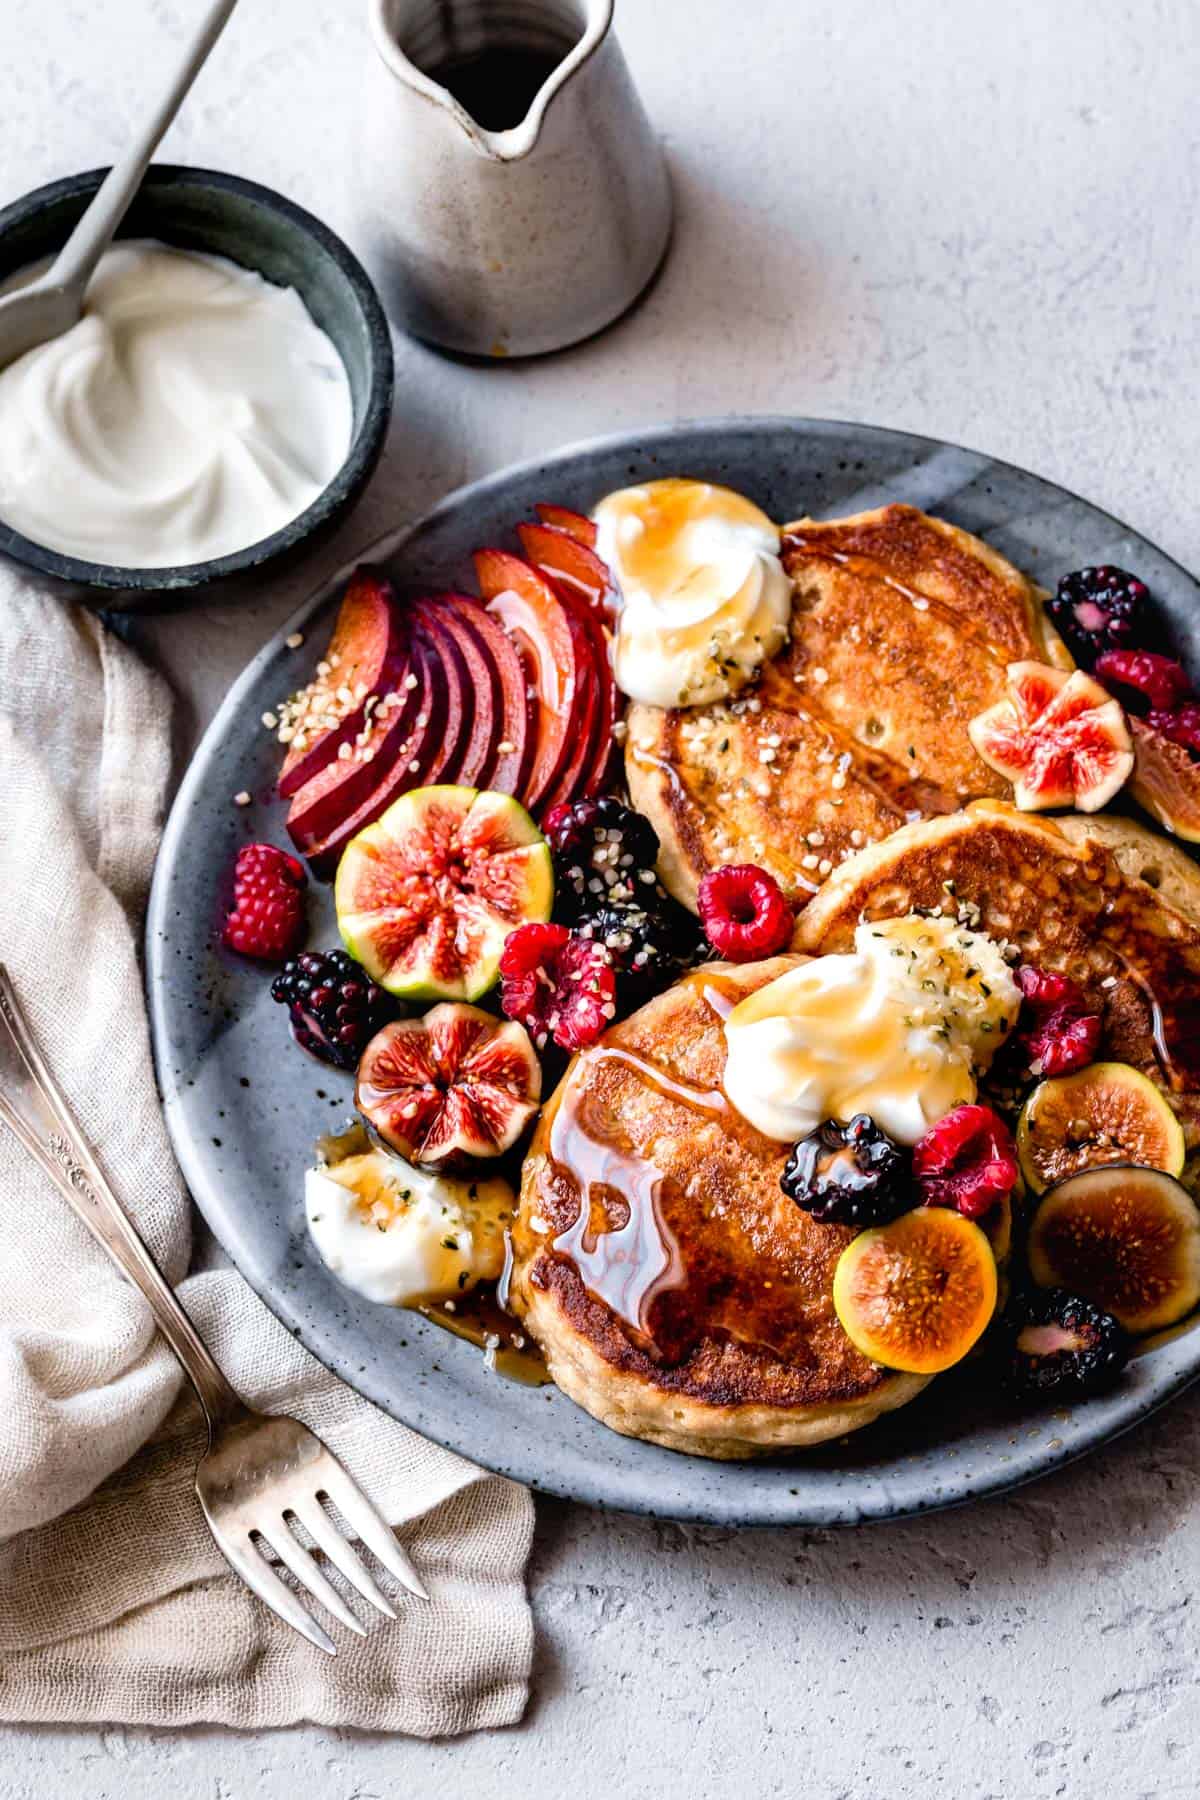 a pile of pancakes and fruit are ready to be devoured